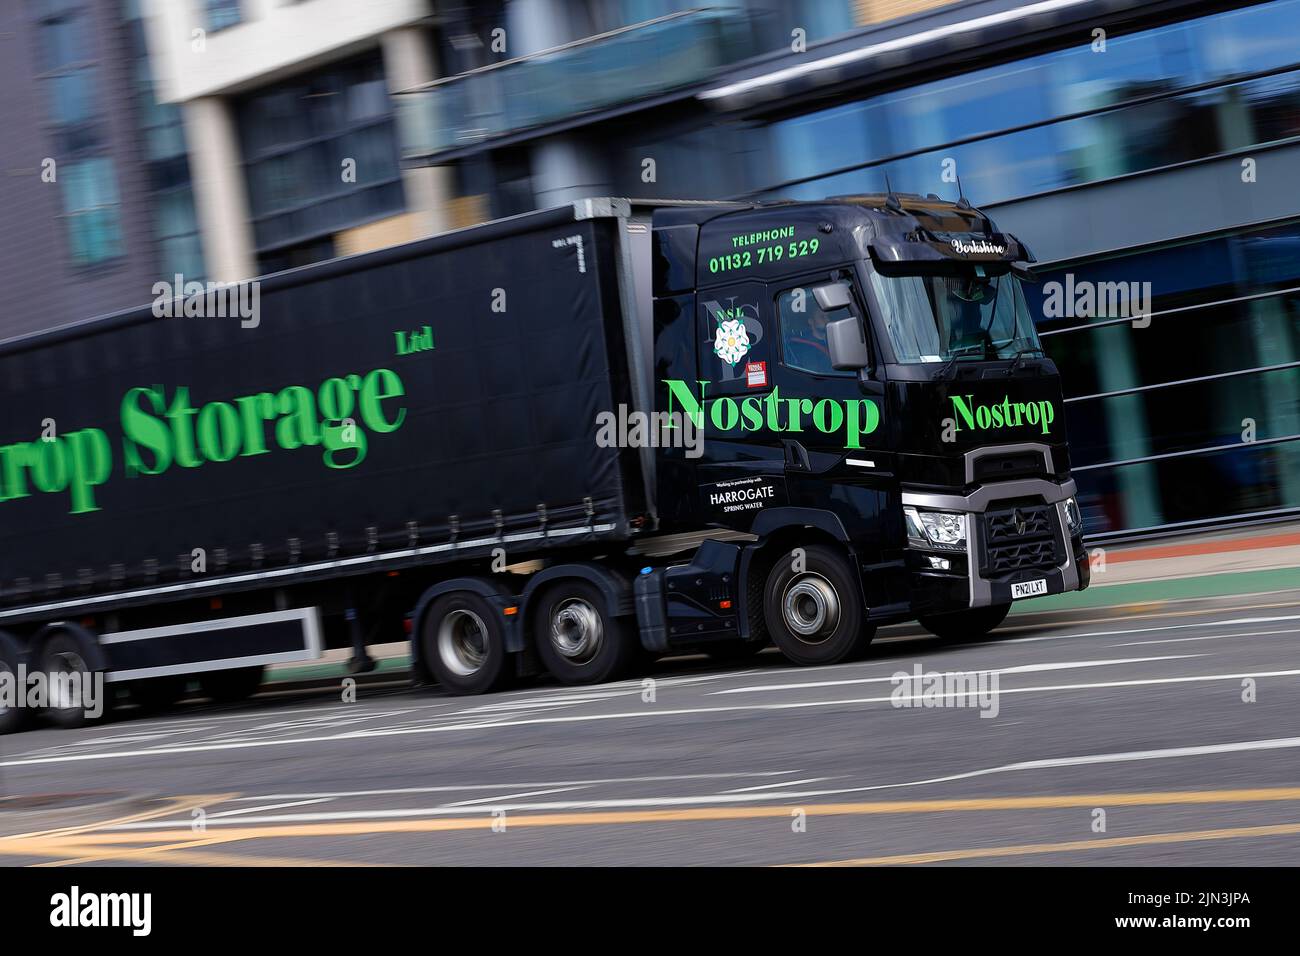 A Nostrop Storage articulated lorry seen driving though Leeds City Centre Stock Photo